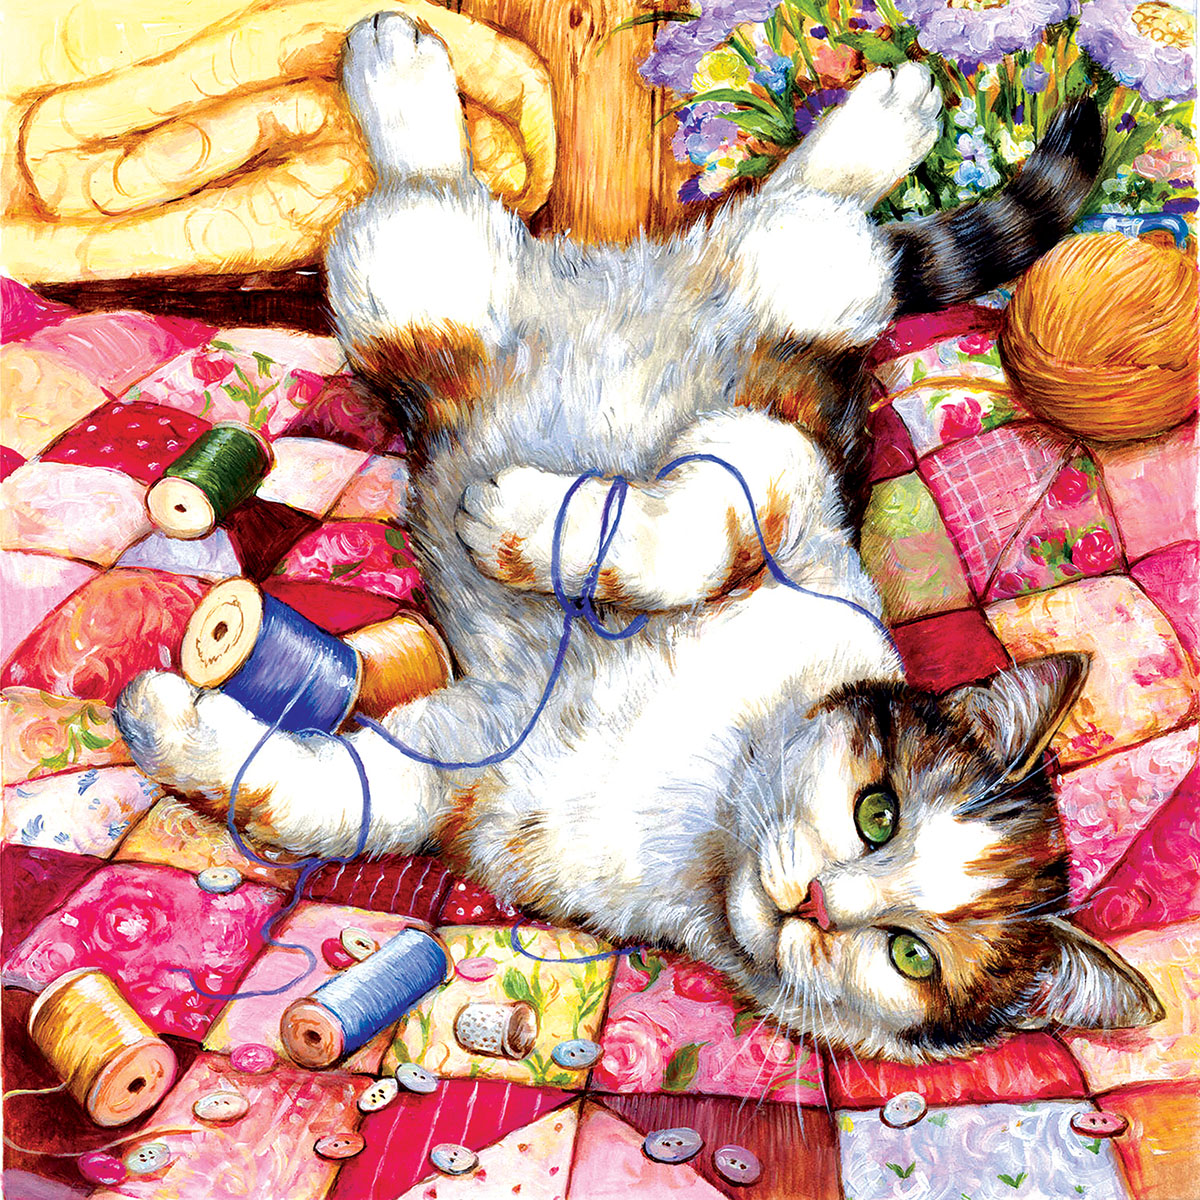 Upside Down Cats Jigsaw Puzzle